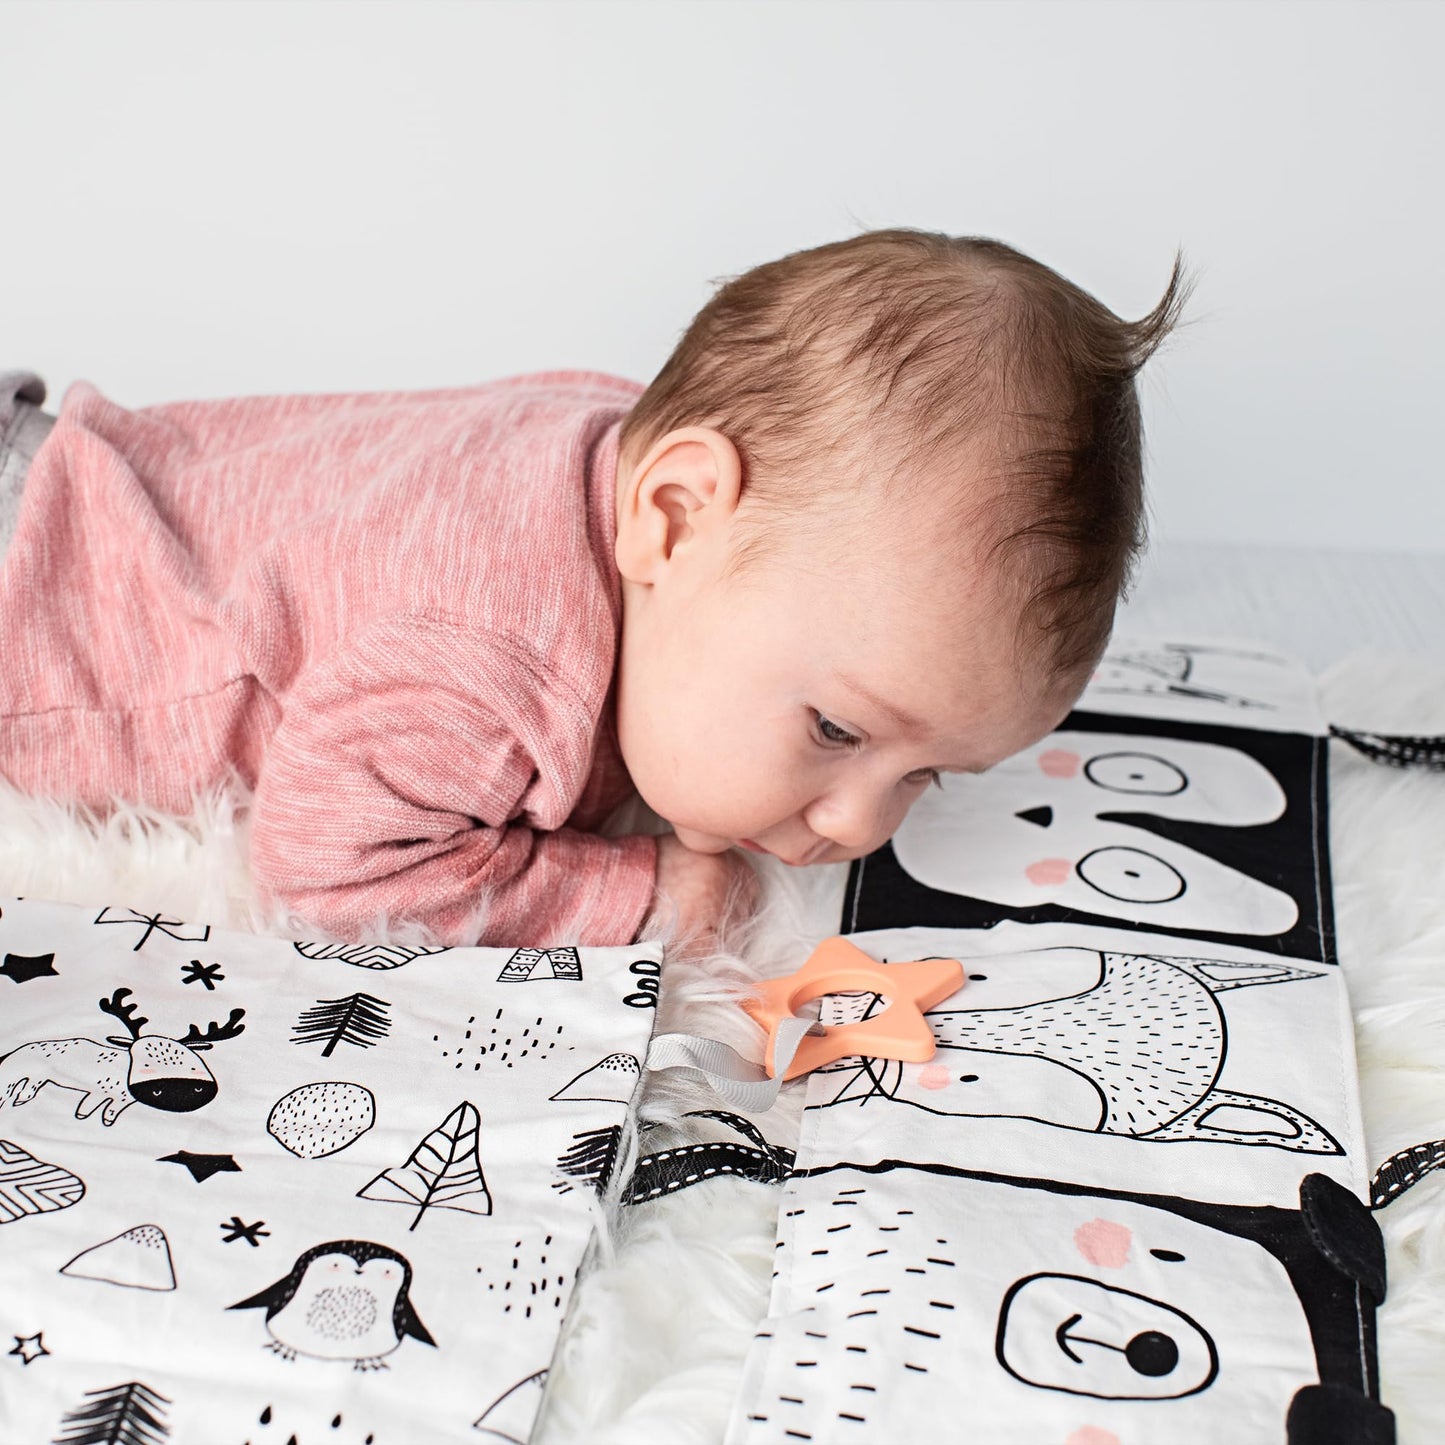 The Ultimate Tummy Time Toys Set of 3 - Soft High Contrast Book, Toy Block, Crinkle Paper and Teether - Stimulating Black & White Sensory Development Toys for Newborns & Infants 0-3, 0-6 Months